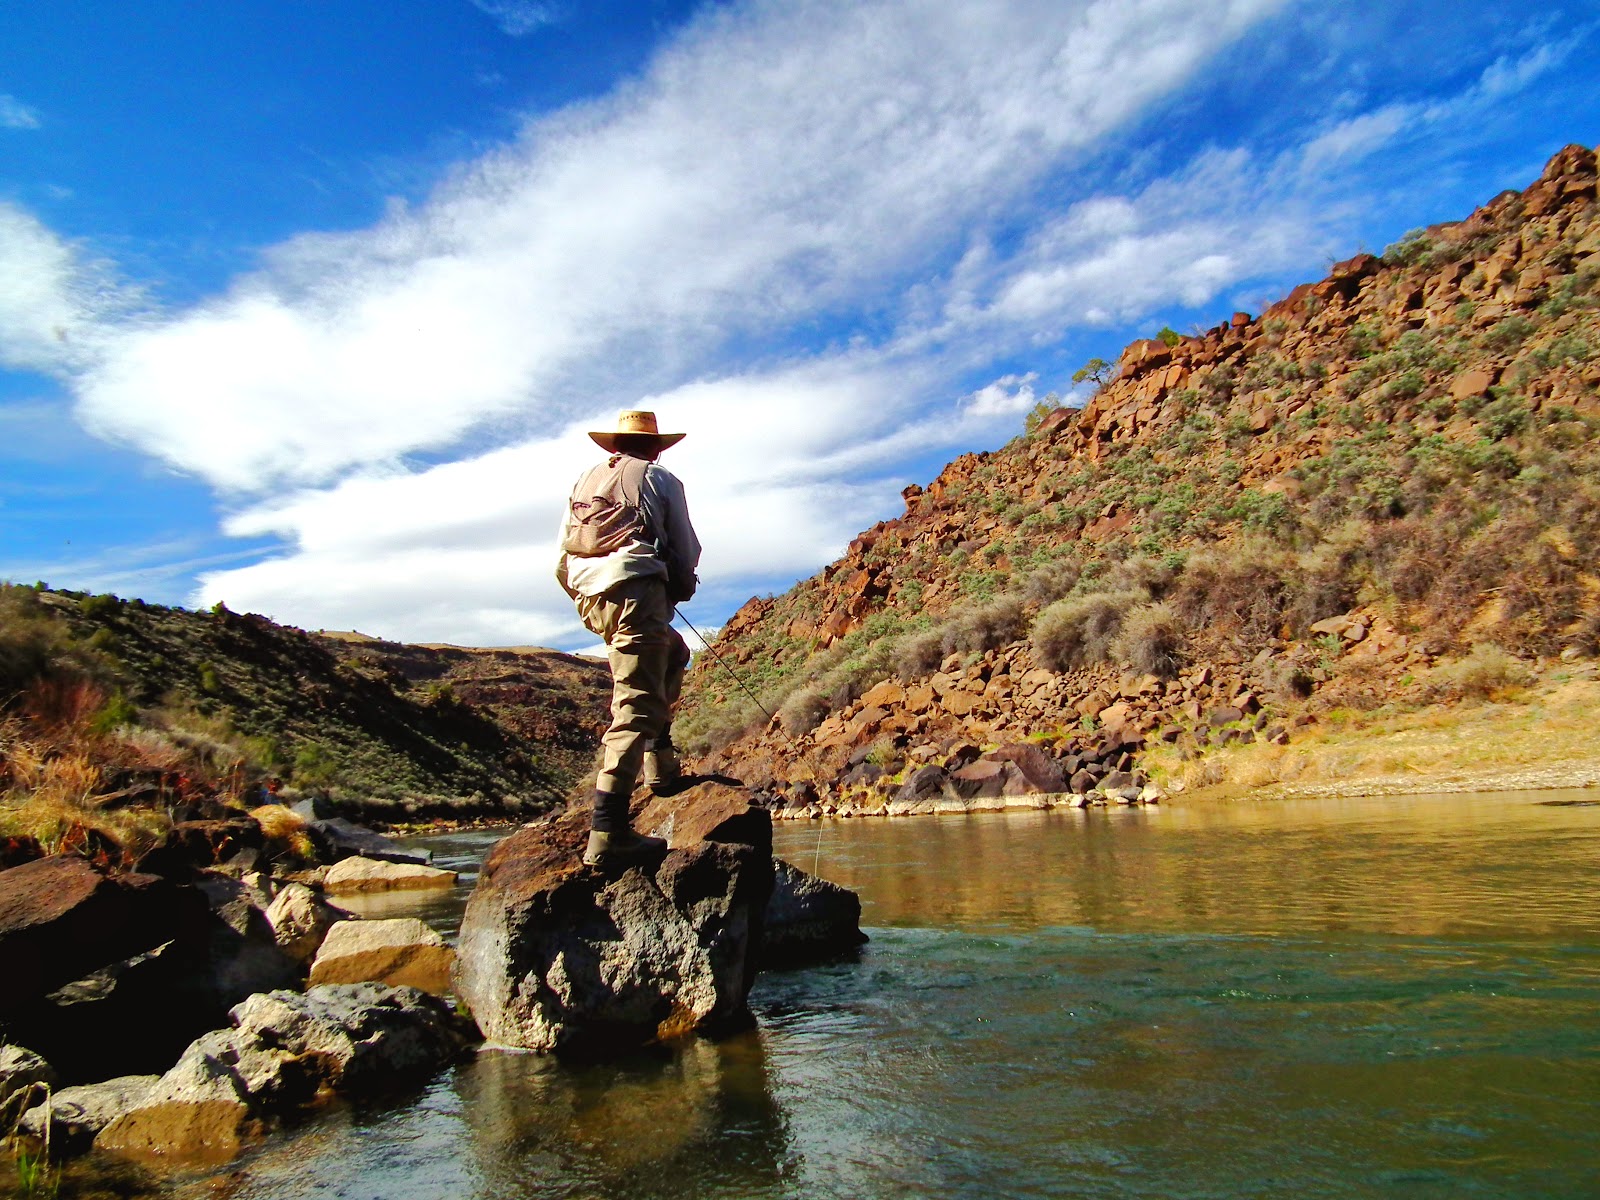 Outdoors Nm On Fishing The Rio Grande Gorge With John Nichols And Taylor Streit